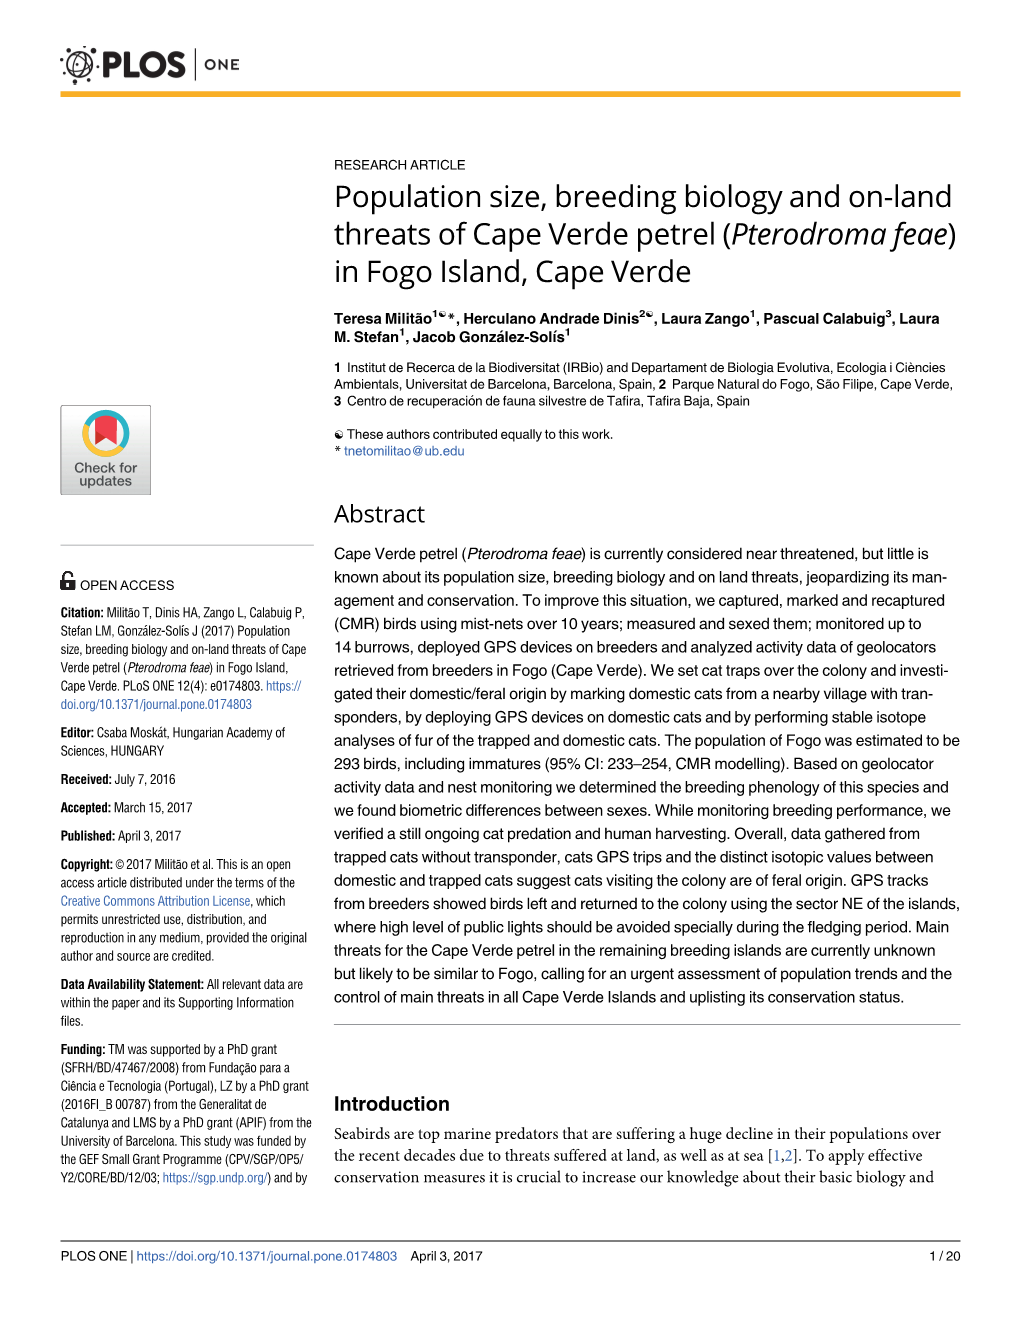 Population Size, Breeding Biology and On-Land Threats of Cape Verde Petrel (Pterodroma Feae) in Fogo Island, Cape Verde